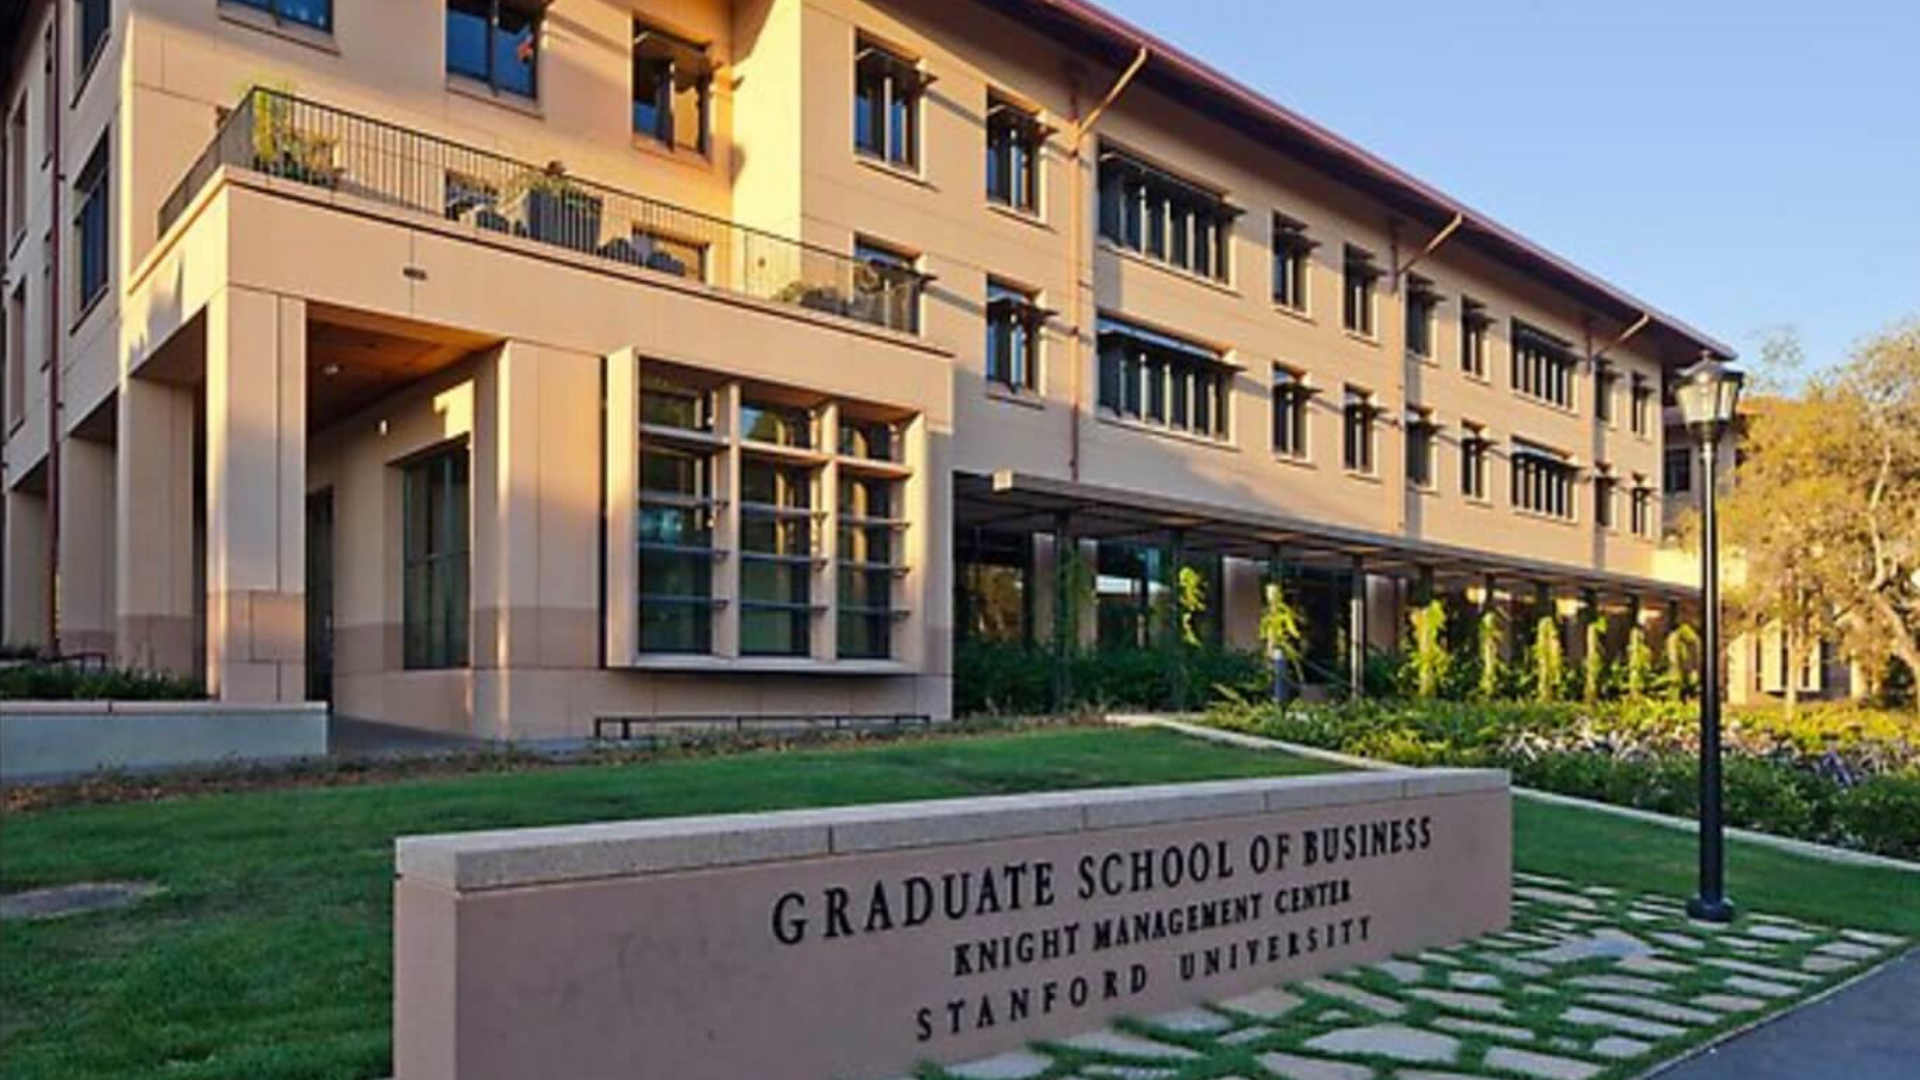 The Stanford Graduate School of Business will provide free education to Ukrainian entrepreneurs